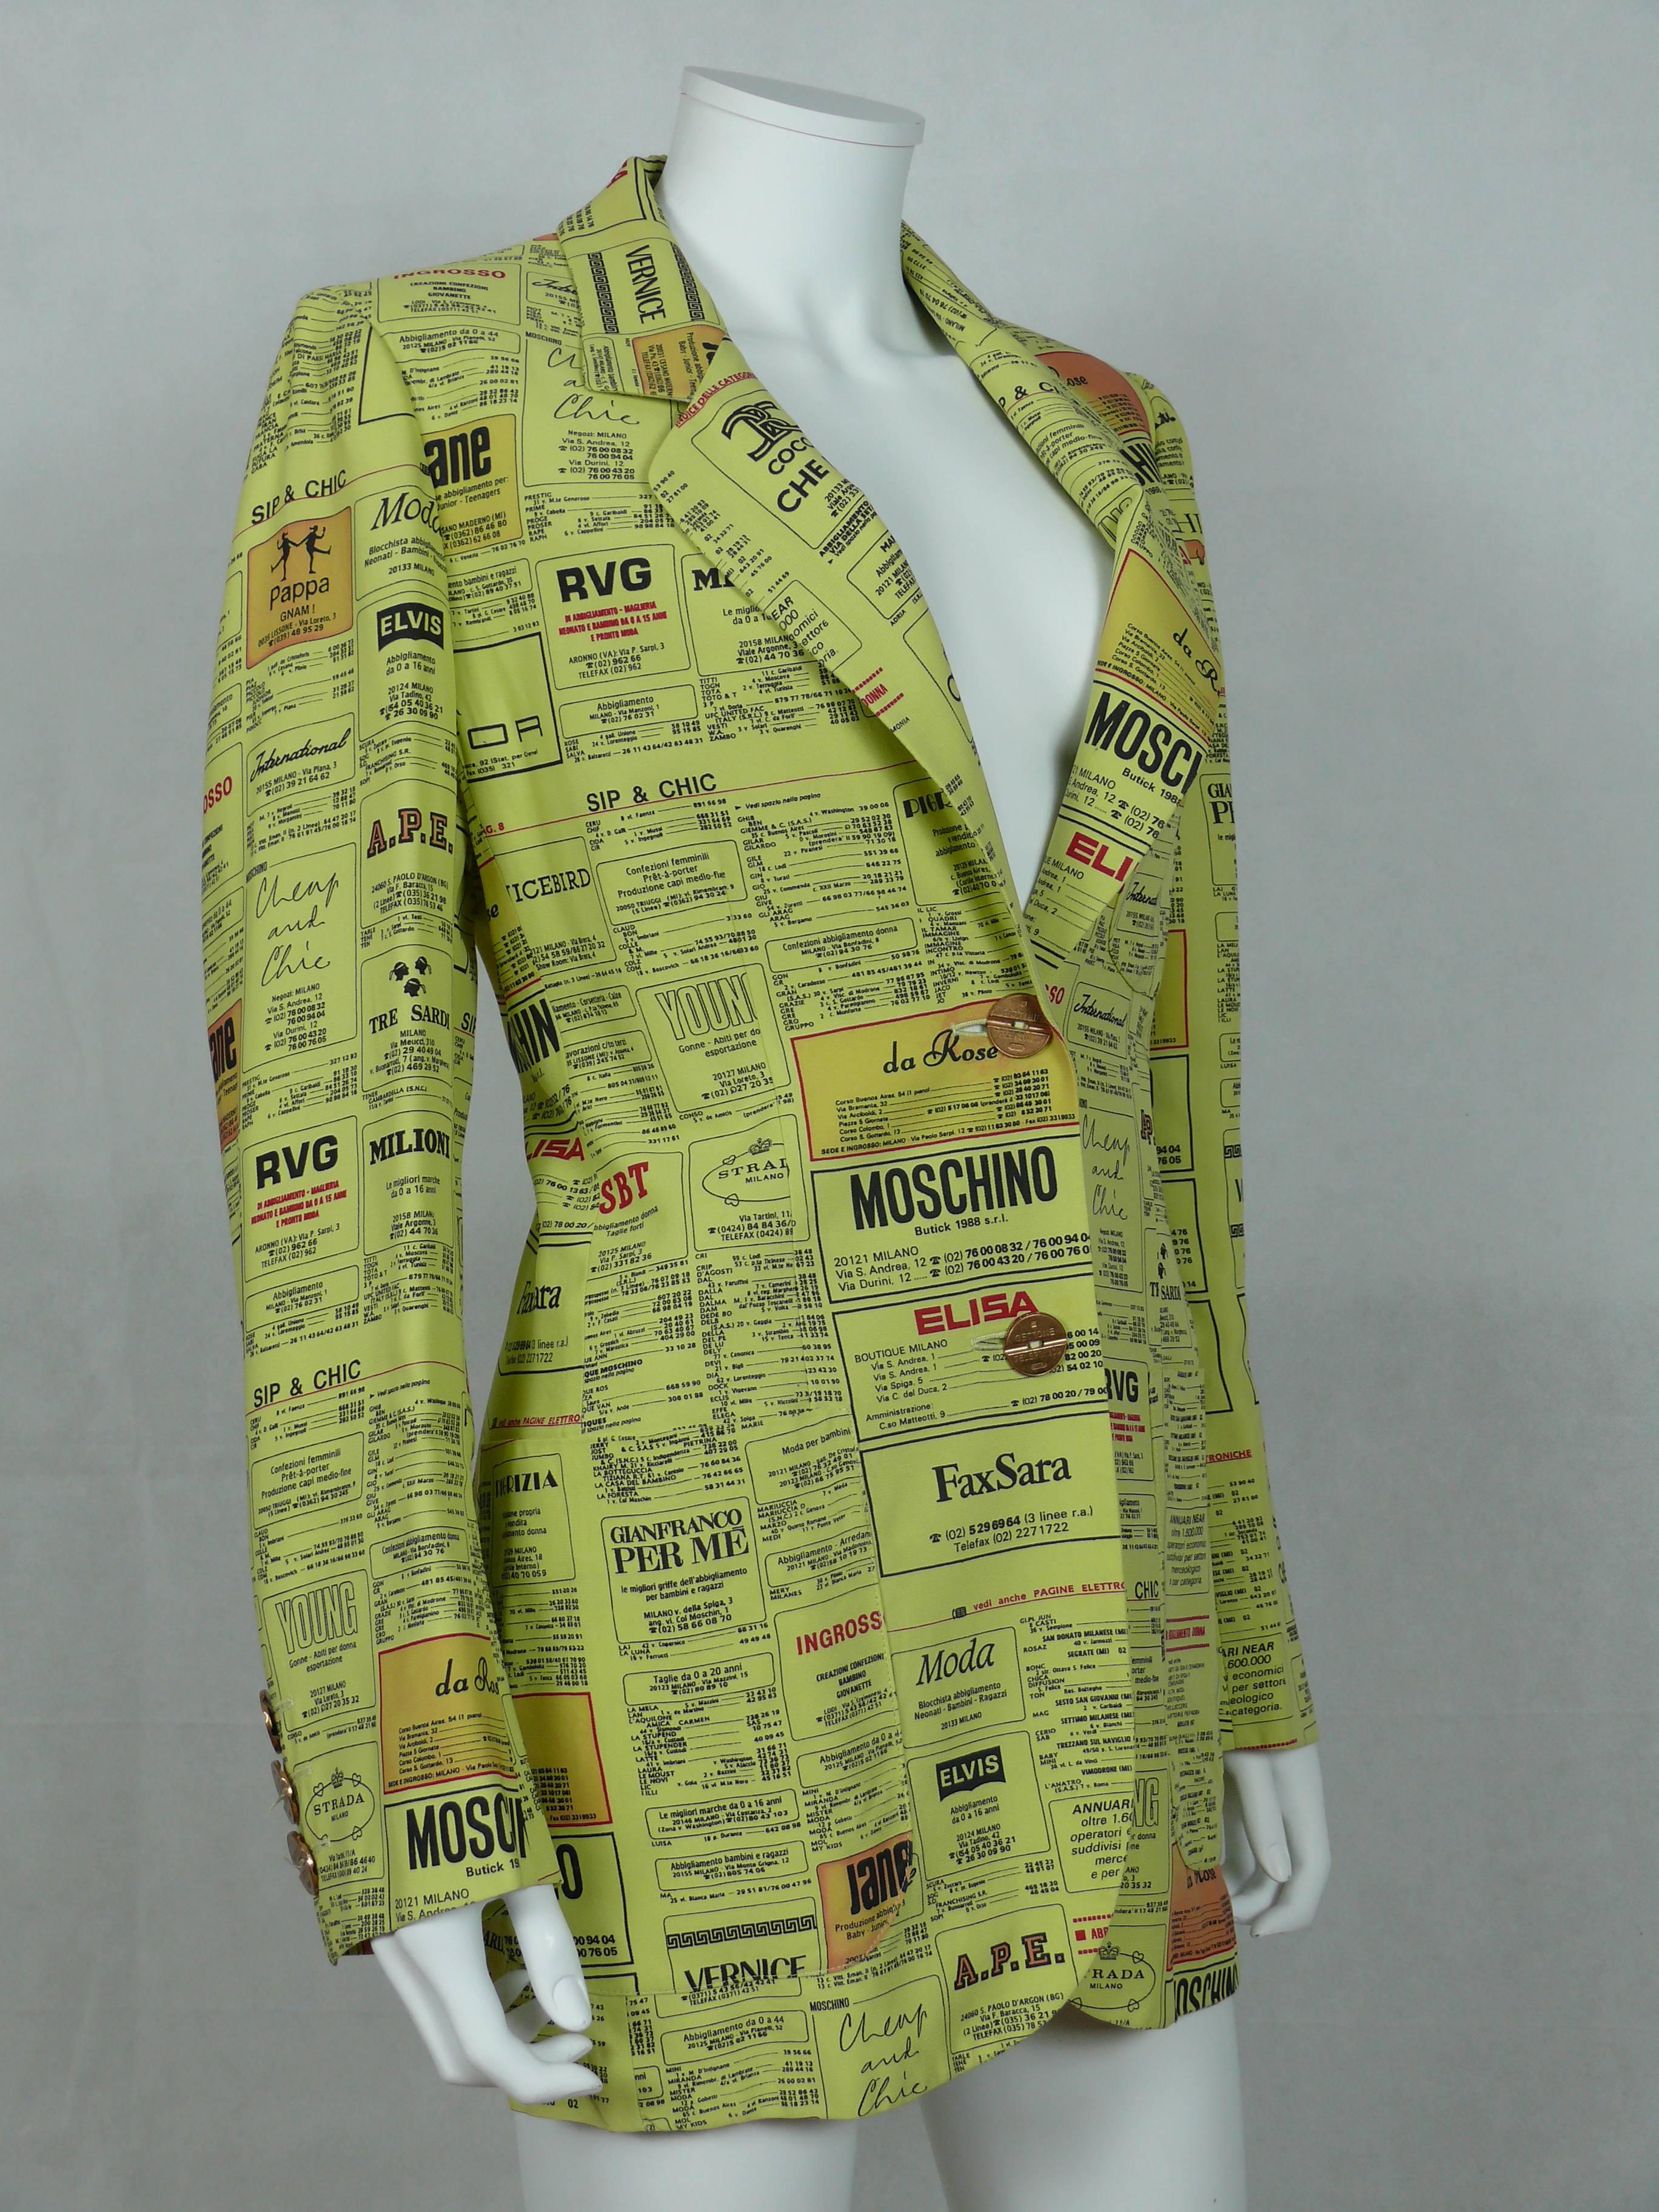 MOSCHINO vintage printed Yellow Pages jacket.

This jacket features advertsing pages from the Milan telephone directory with logos of fashion houses such as Hermès (here Charmès) and Max Mara (which appears as Fax Sara)... Buttons are crafted from